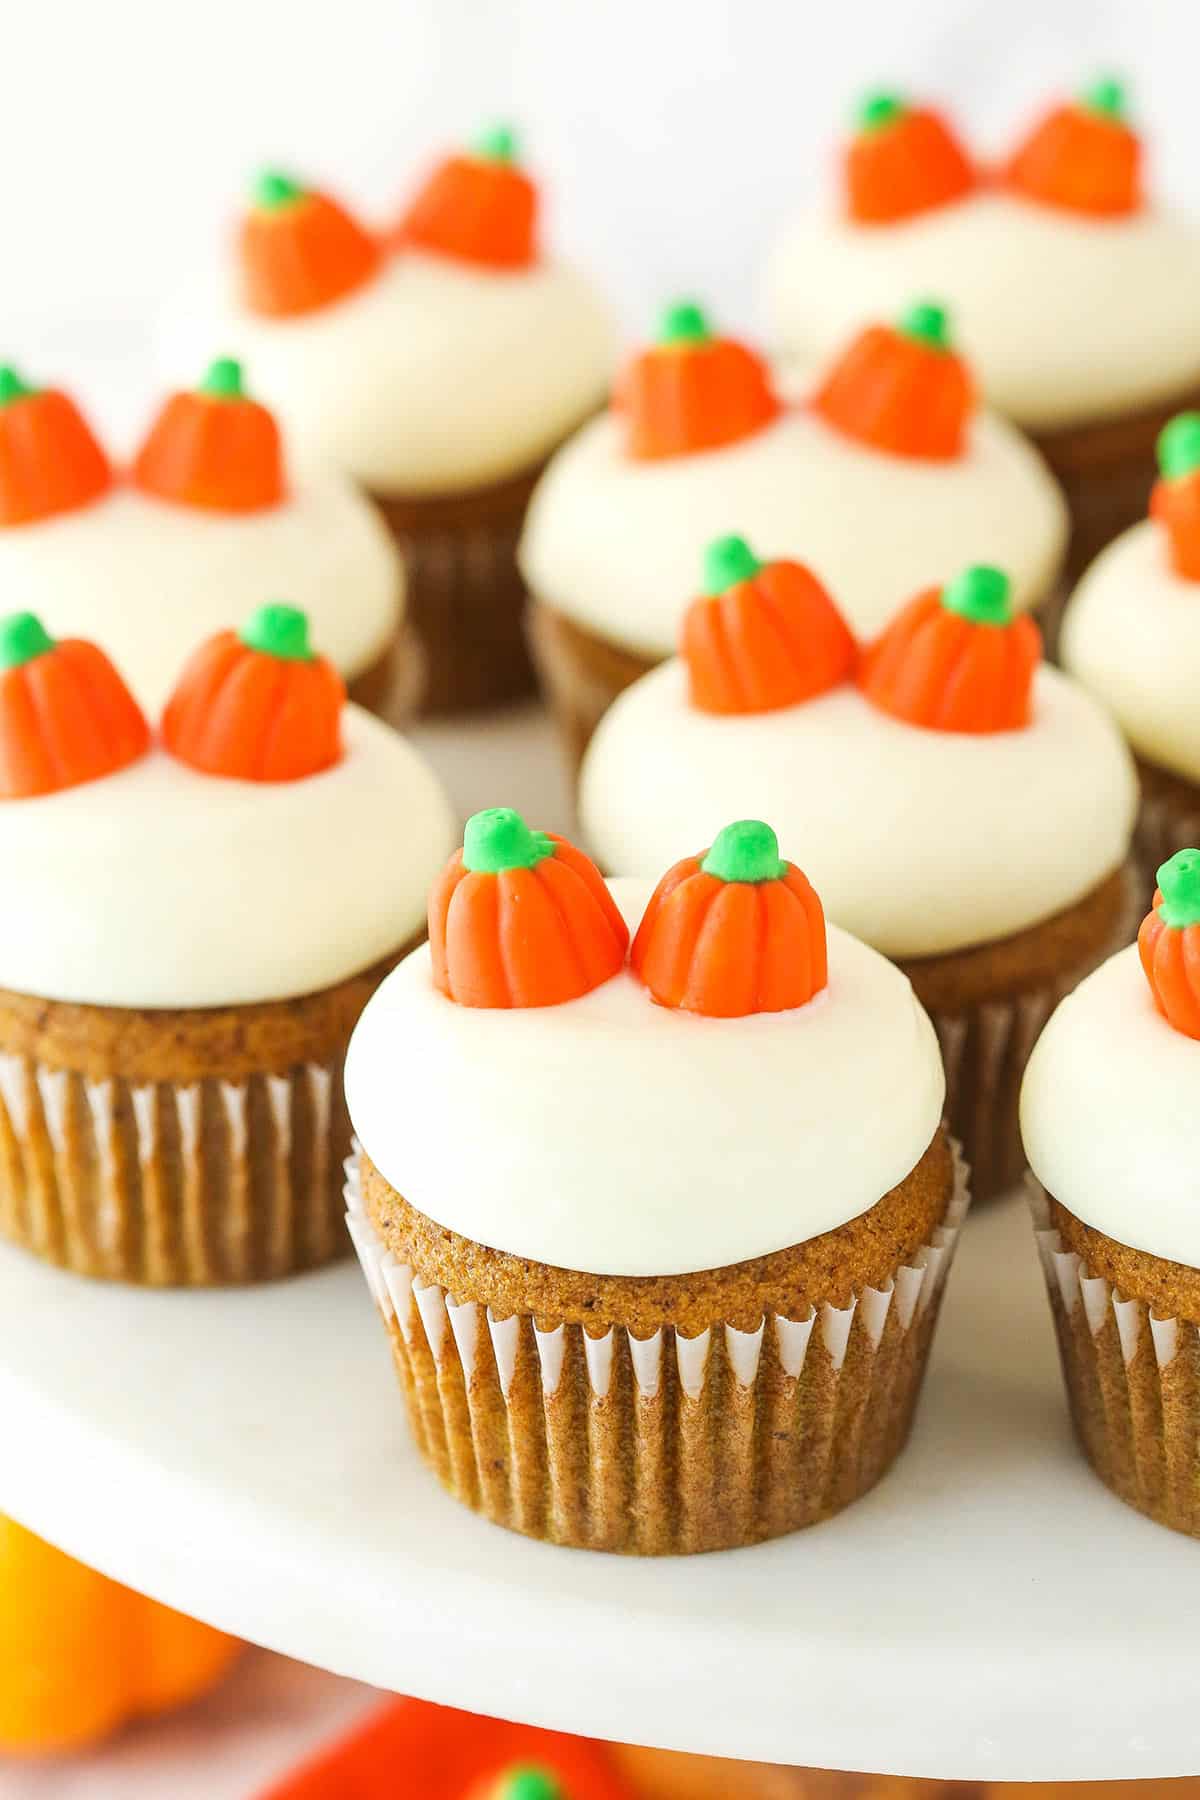 Pumpkin cupcakes on a cake stand.